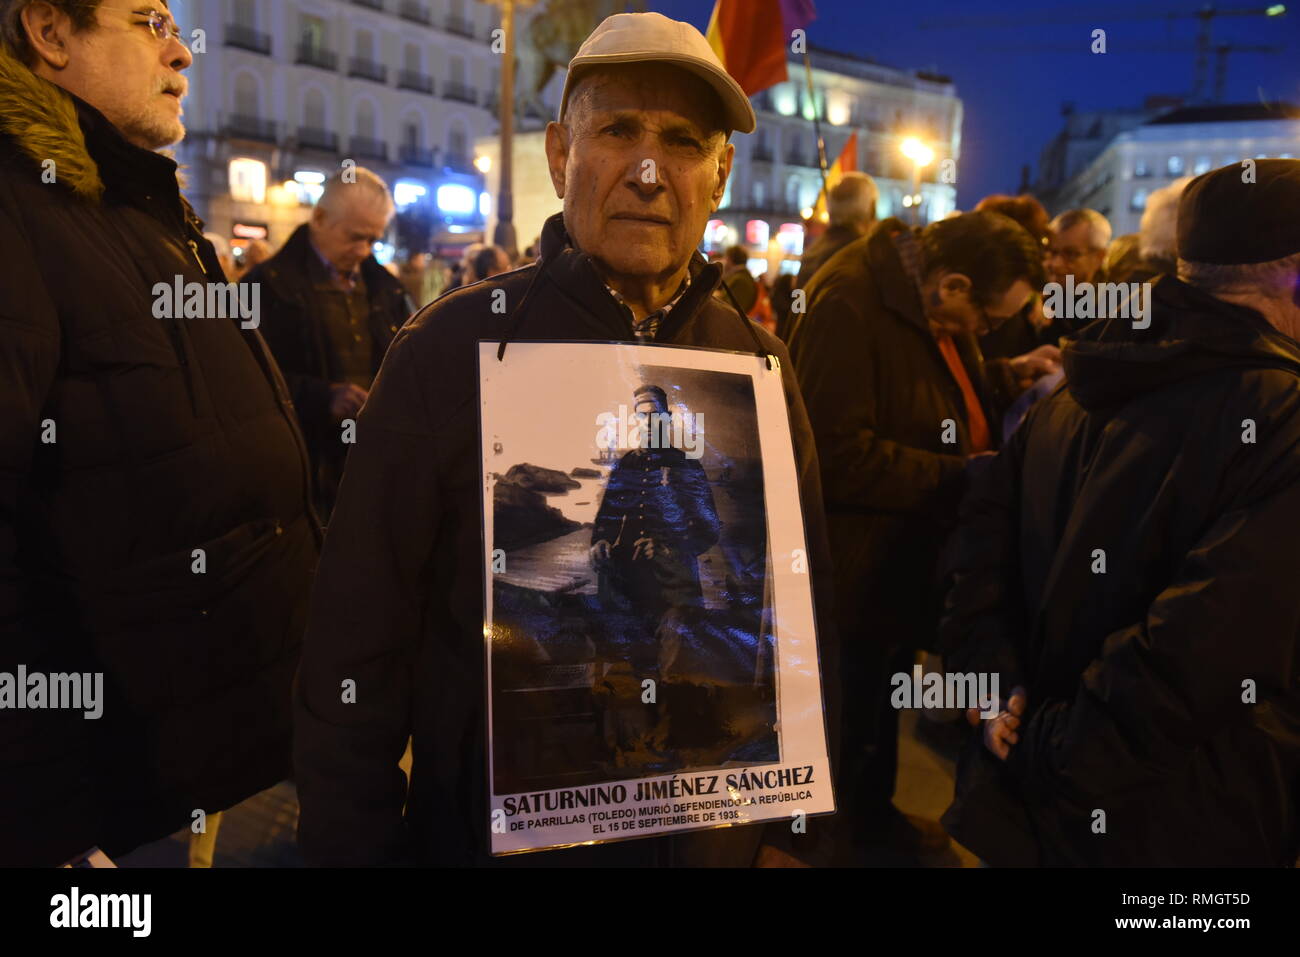 A protester is seen holding a picture of his missing father during the Spanish dictatorship of Francisco Franco (1936-1975), as he takes part during the protest. Around hundred people gathered in Madrid to protest against immunity for the crimes committed during the Spanish Civil War, the Francisco Franco's dictatorship, and to demand justice for victims and relatives. Stock Photo